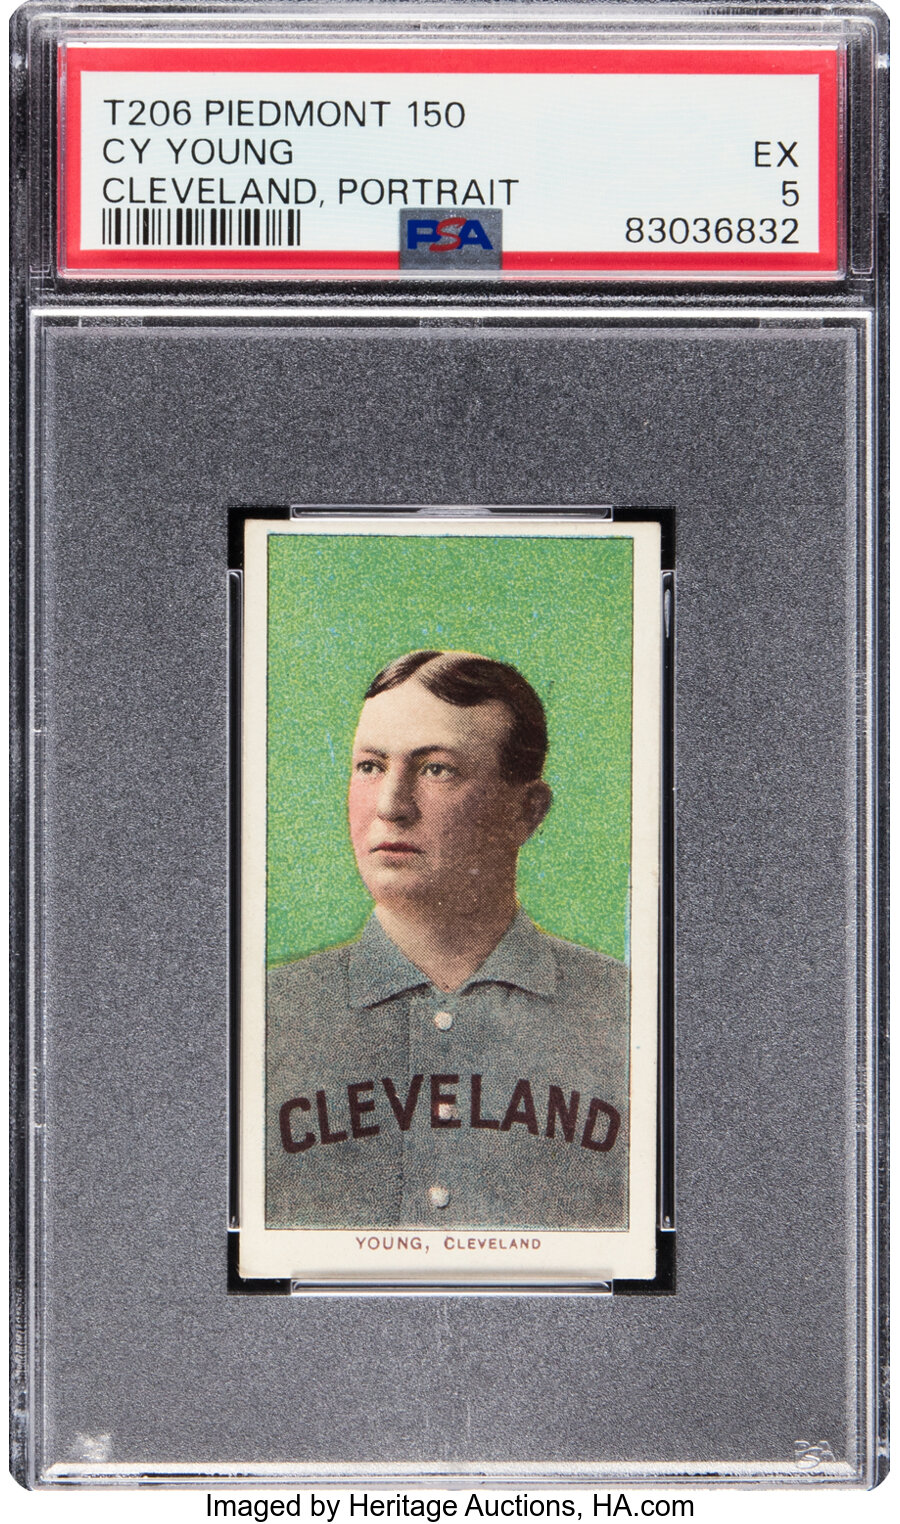 1909-11 T206 Piedmont 150/25 Cy Young (Portrait) PSA EX 5 -- From The Ramsburg Collection